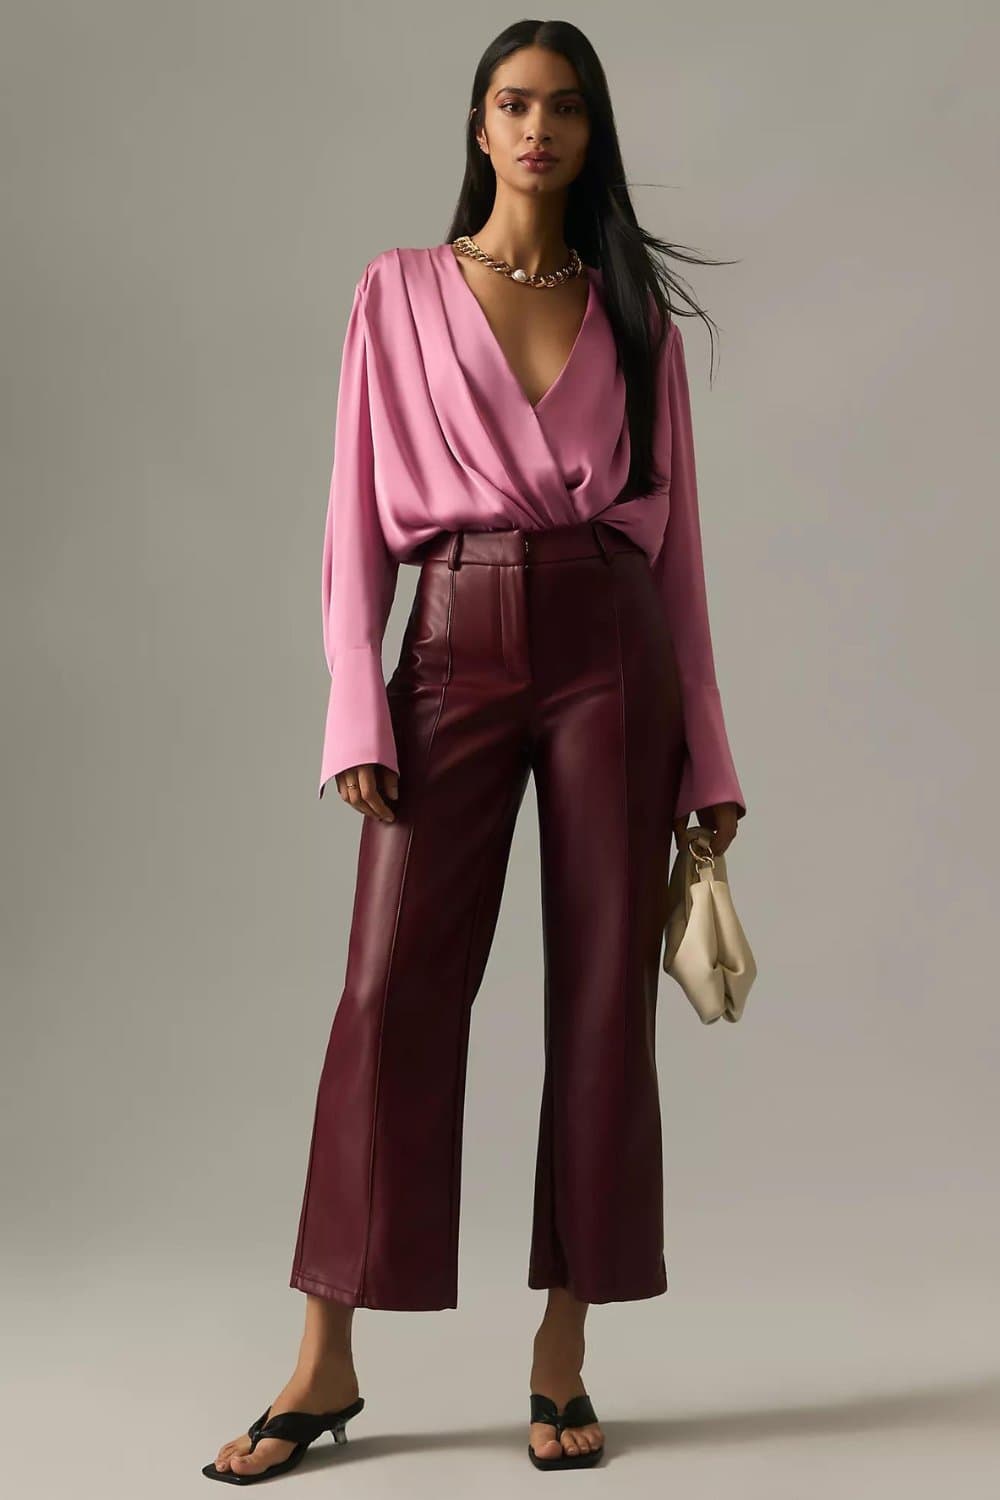 Fall Winery Outfit with Silk Top